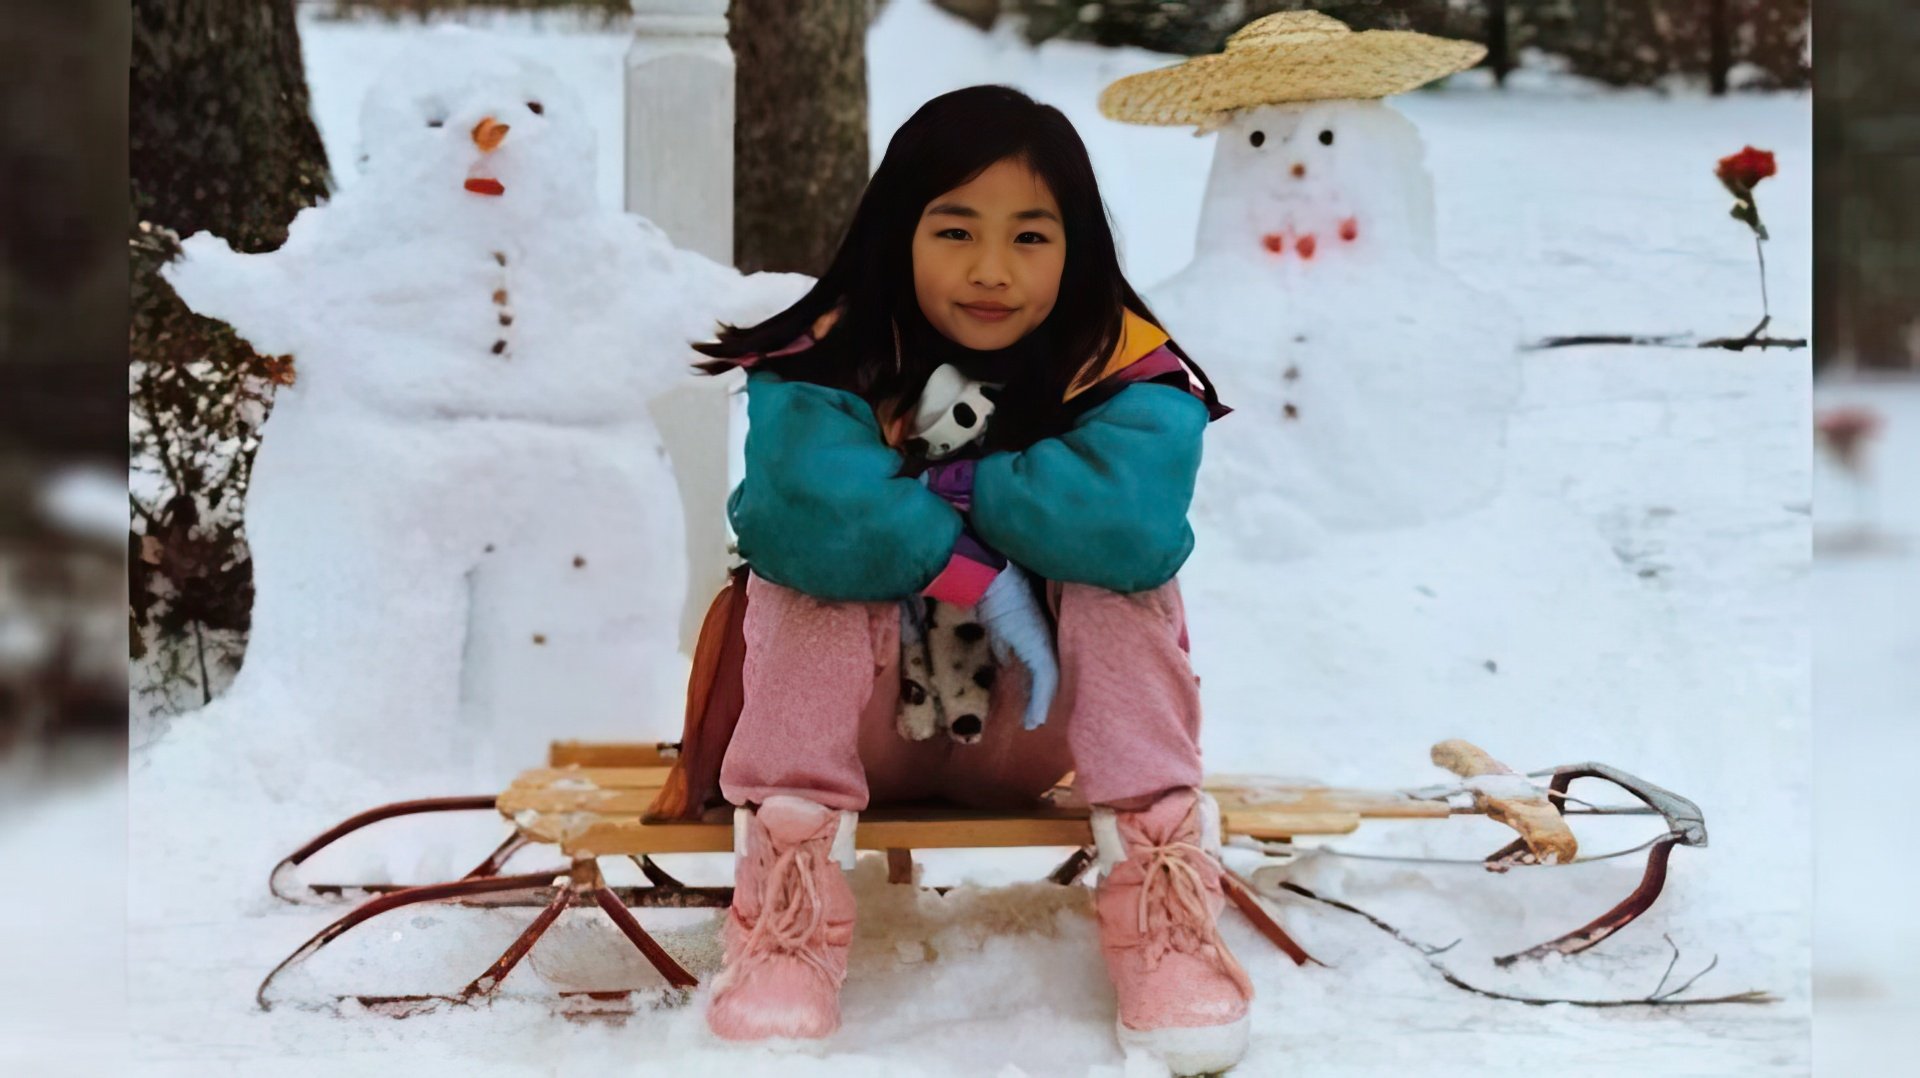 Childhood pictures of Constance Wu